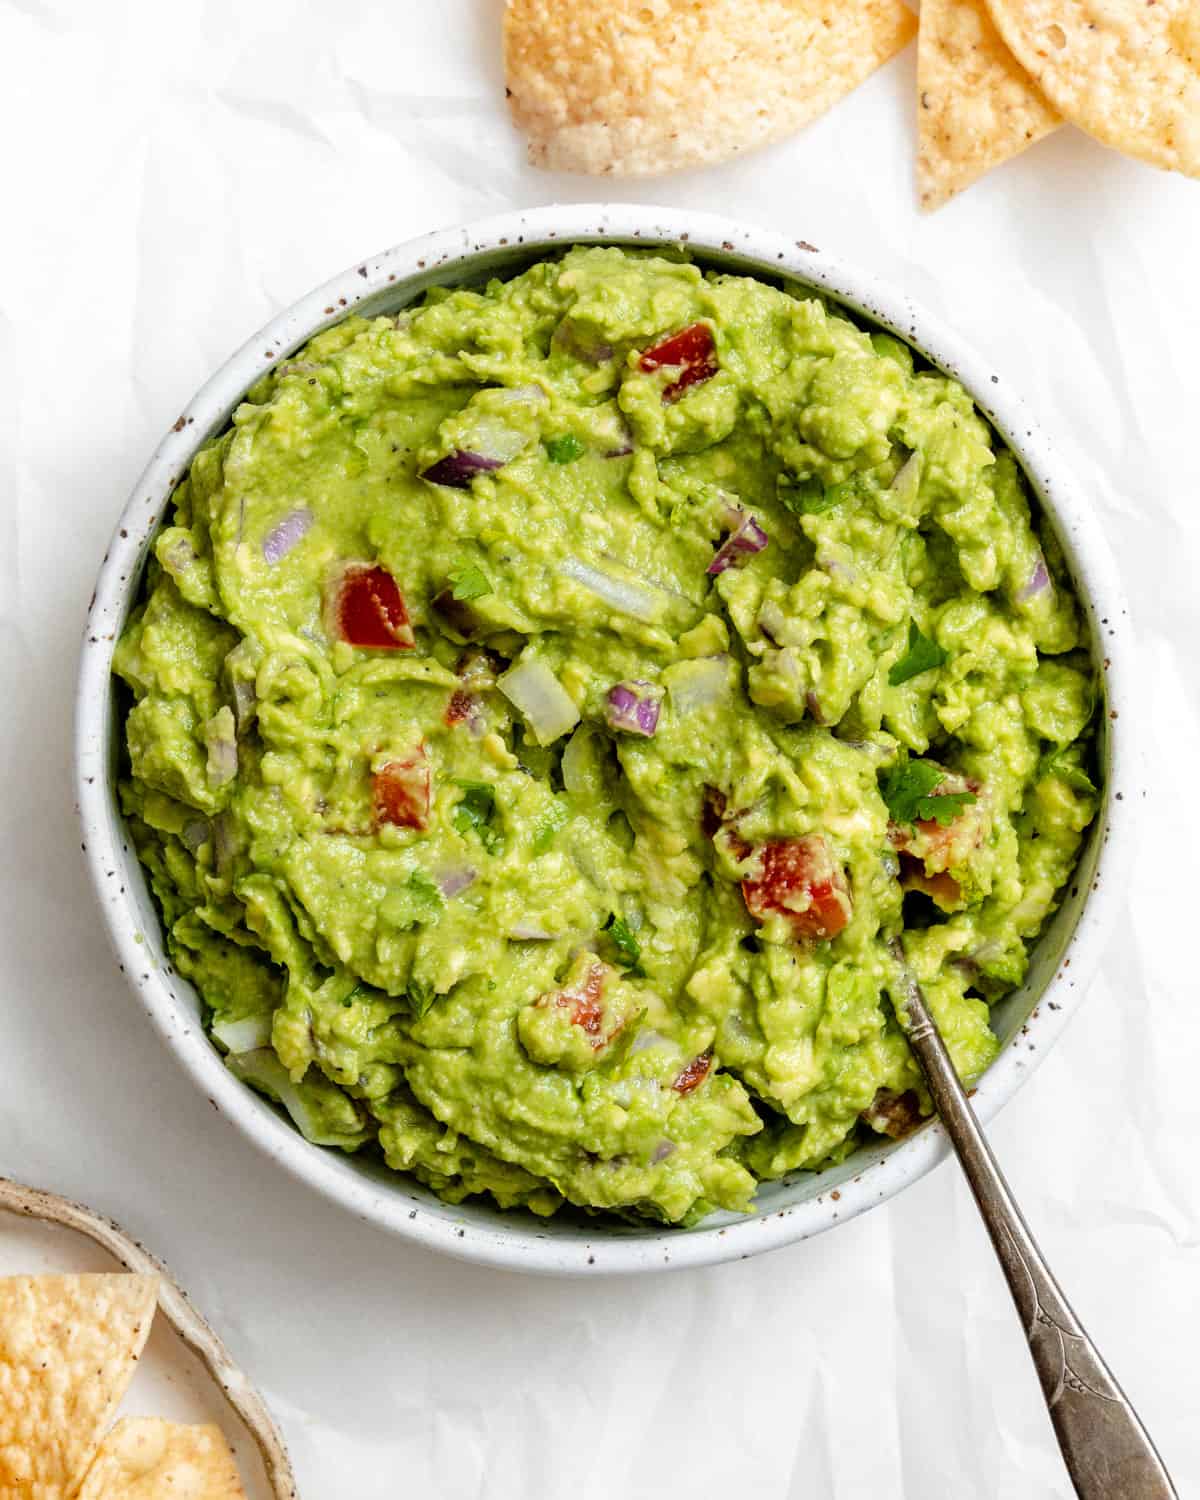 Completed Easy Guacamole in a white bowl against a white background.